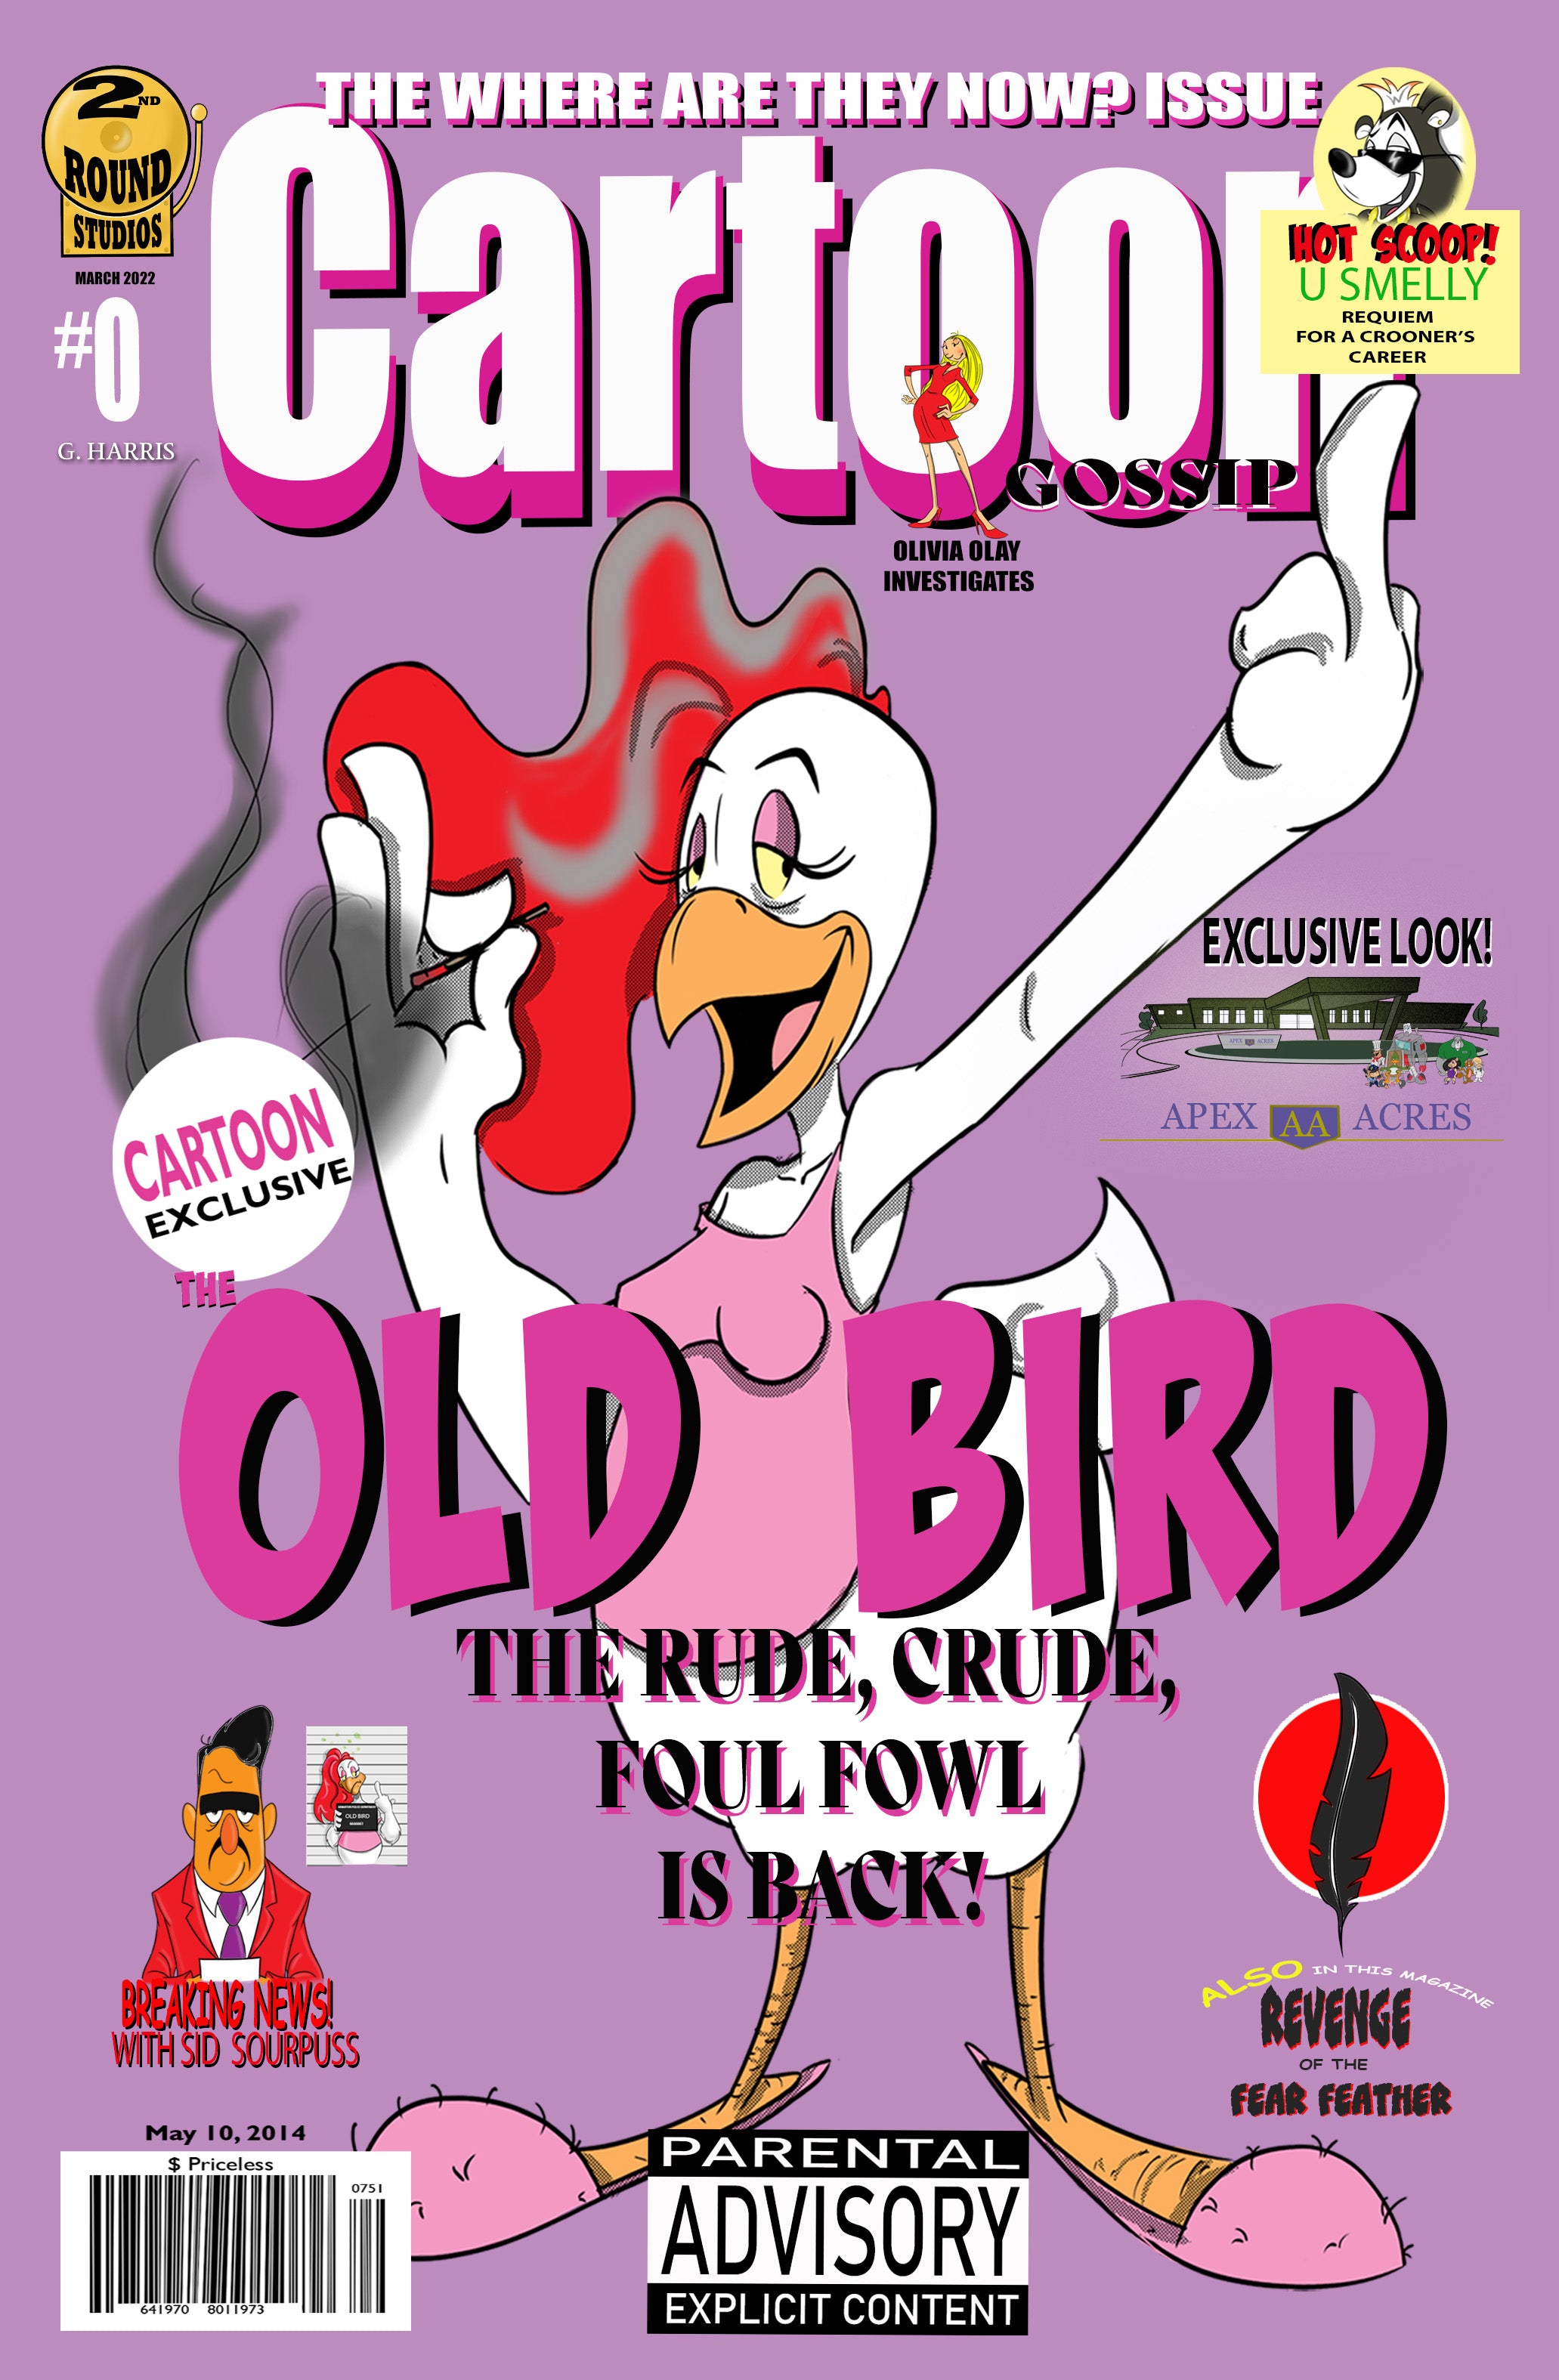 The Old Bird comic book cover features the Old Bird, a former cartoon star and wild child.